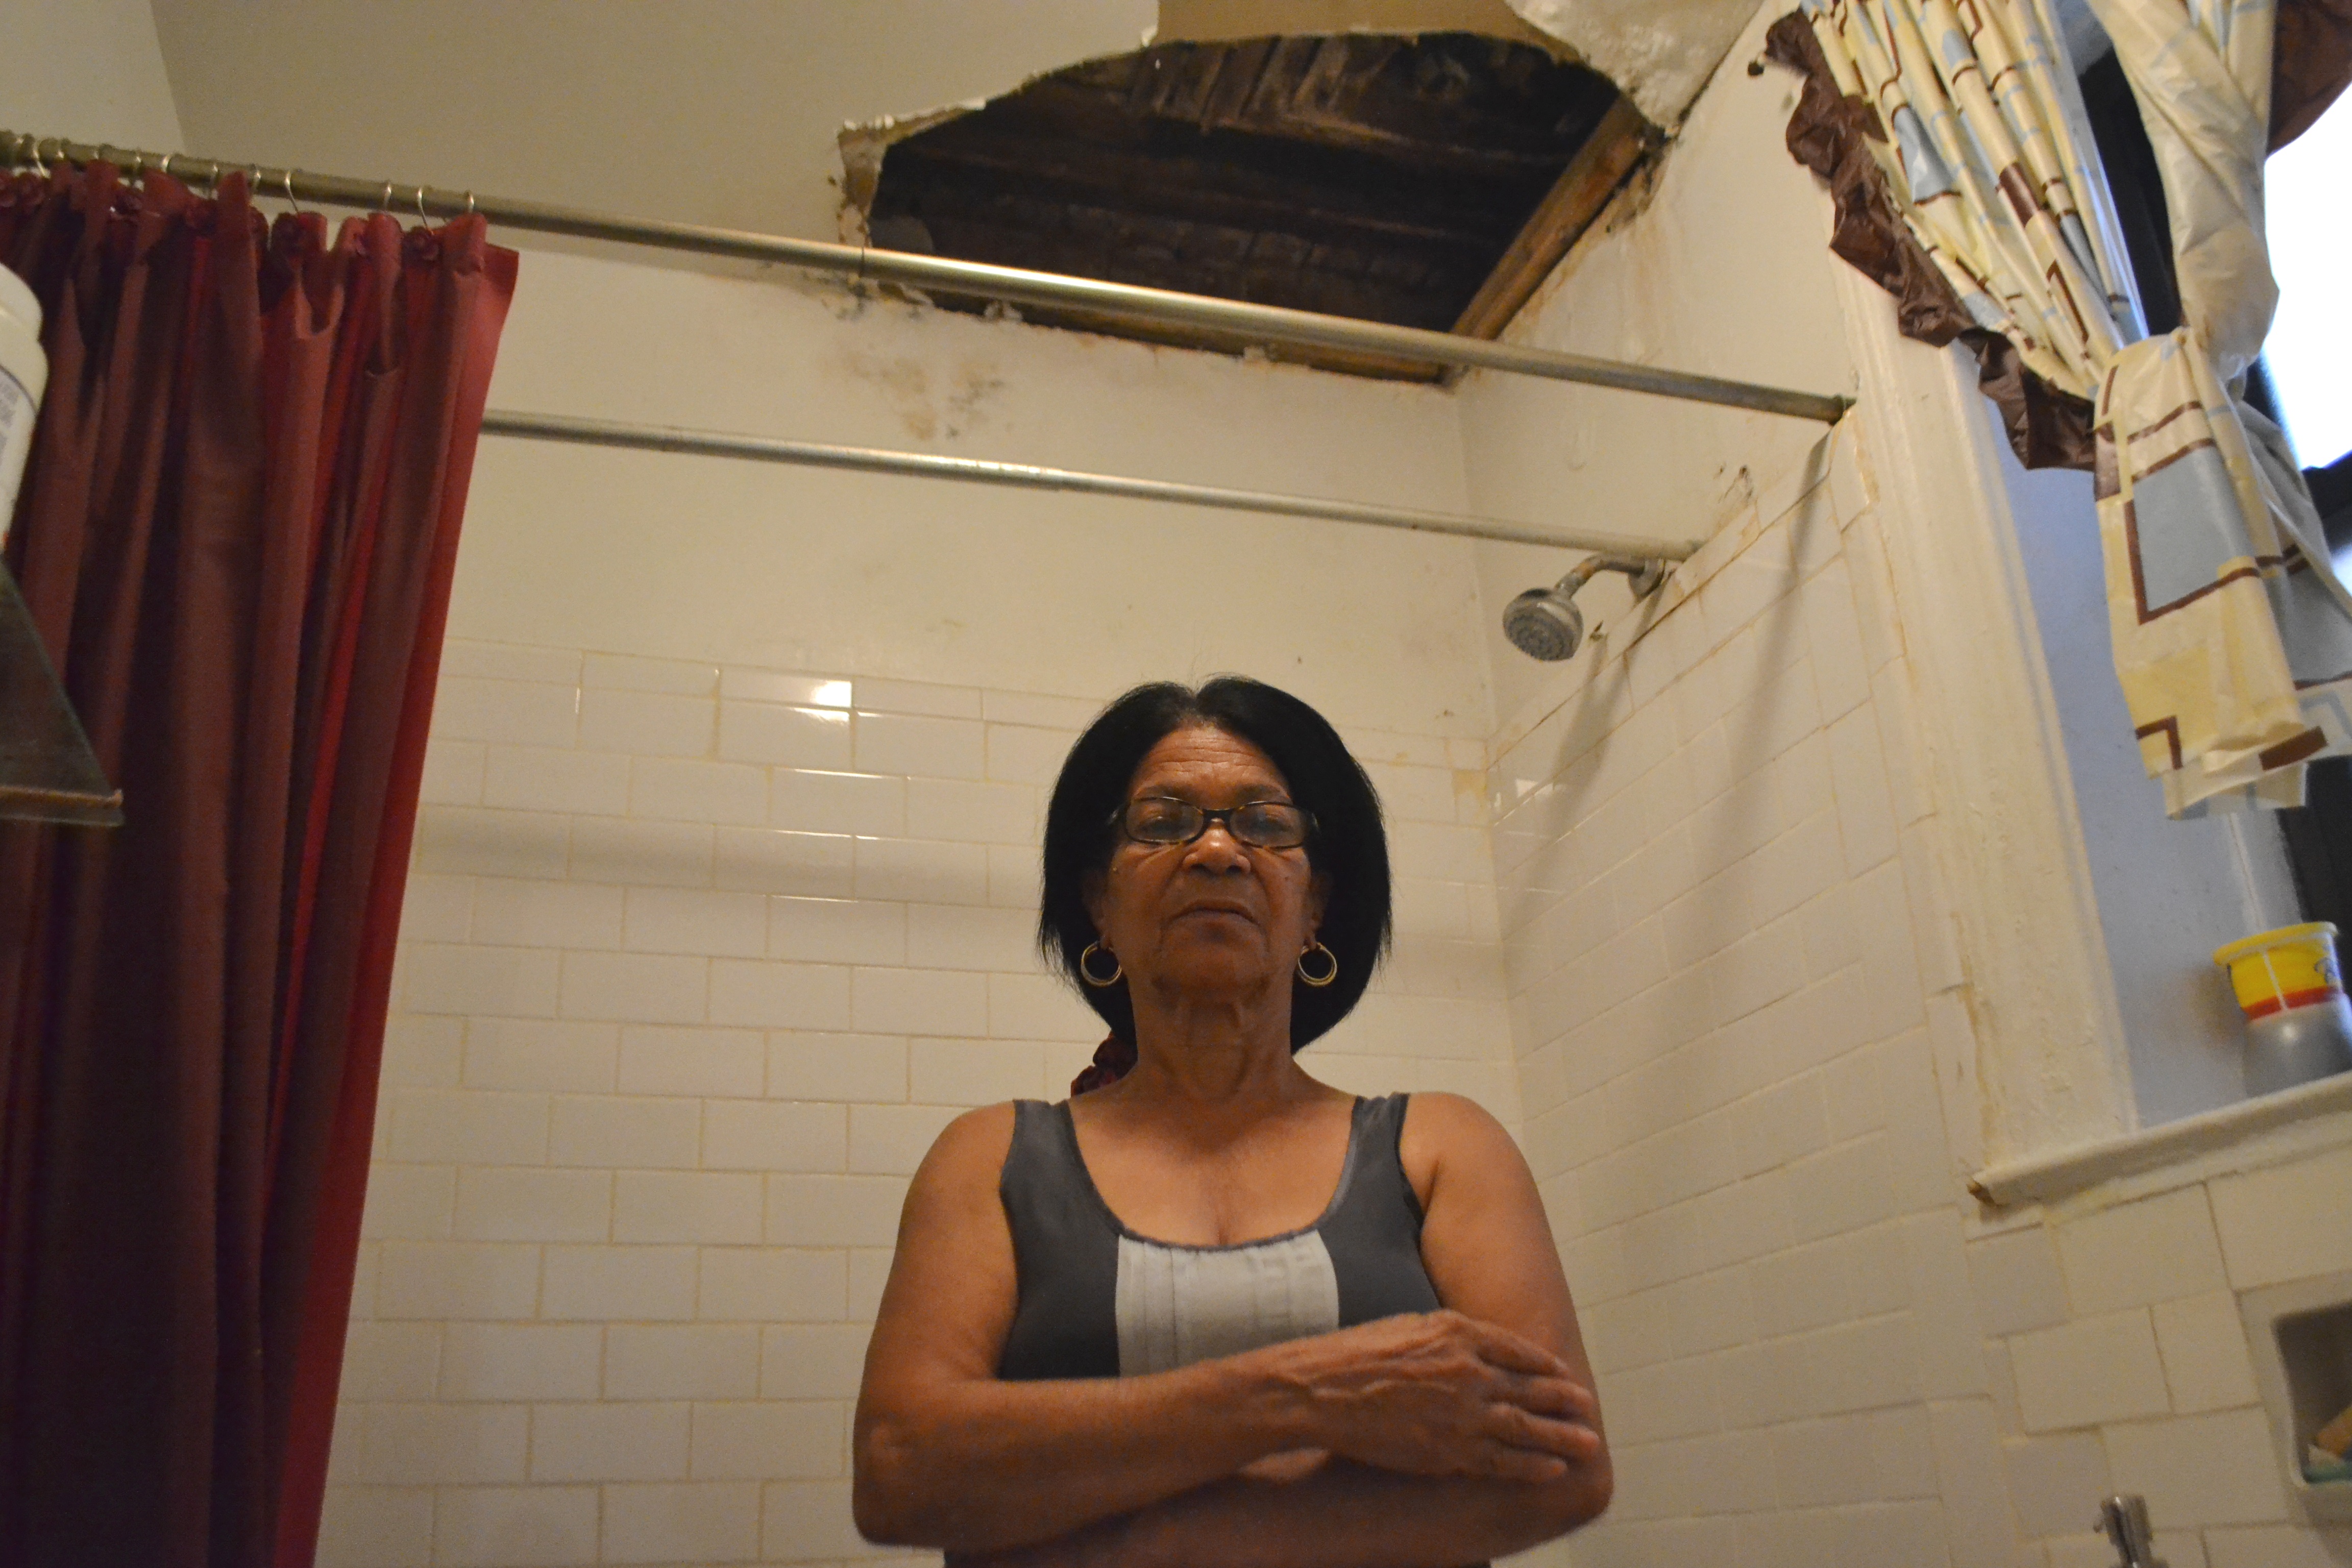 Enriqueta Vicioso, who has been living at the site for 15 years, calls the conditions she lives in “fatal” as she is afraid to shower in her bathroom because there is a gaping hole in the ceiling.